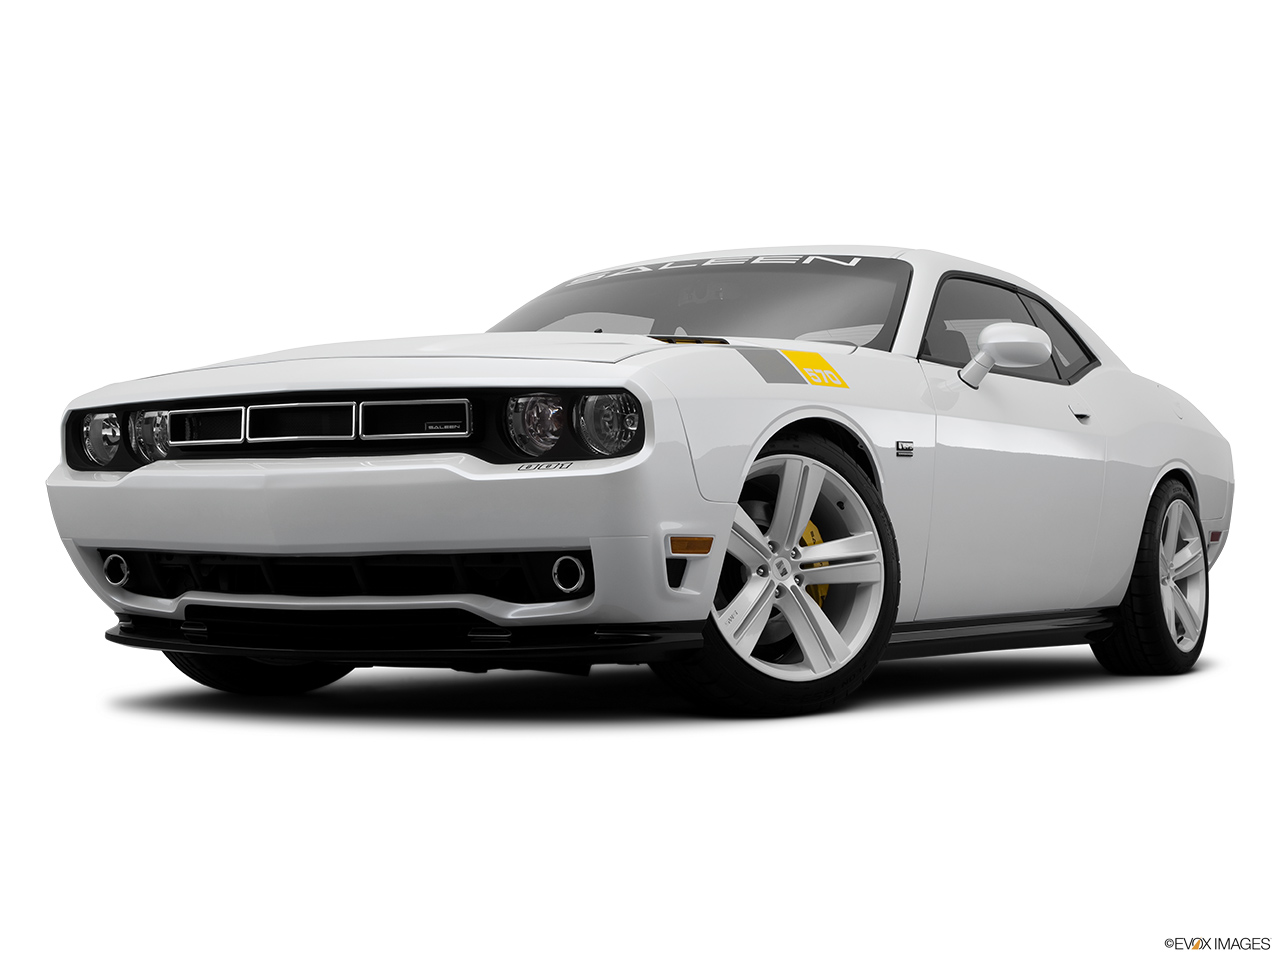 2014 Saleen 570 Challenger Label 570 Black Label Front angle view, low wide perspective. 